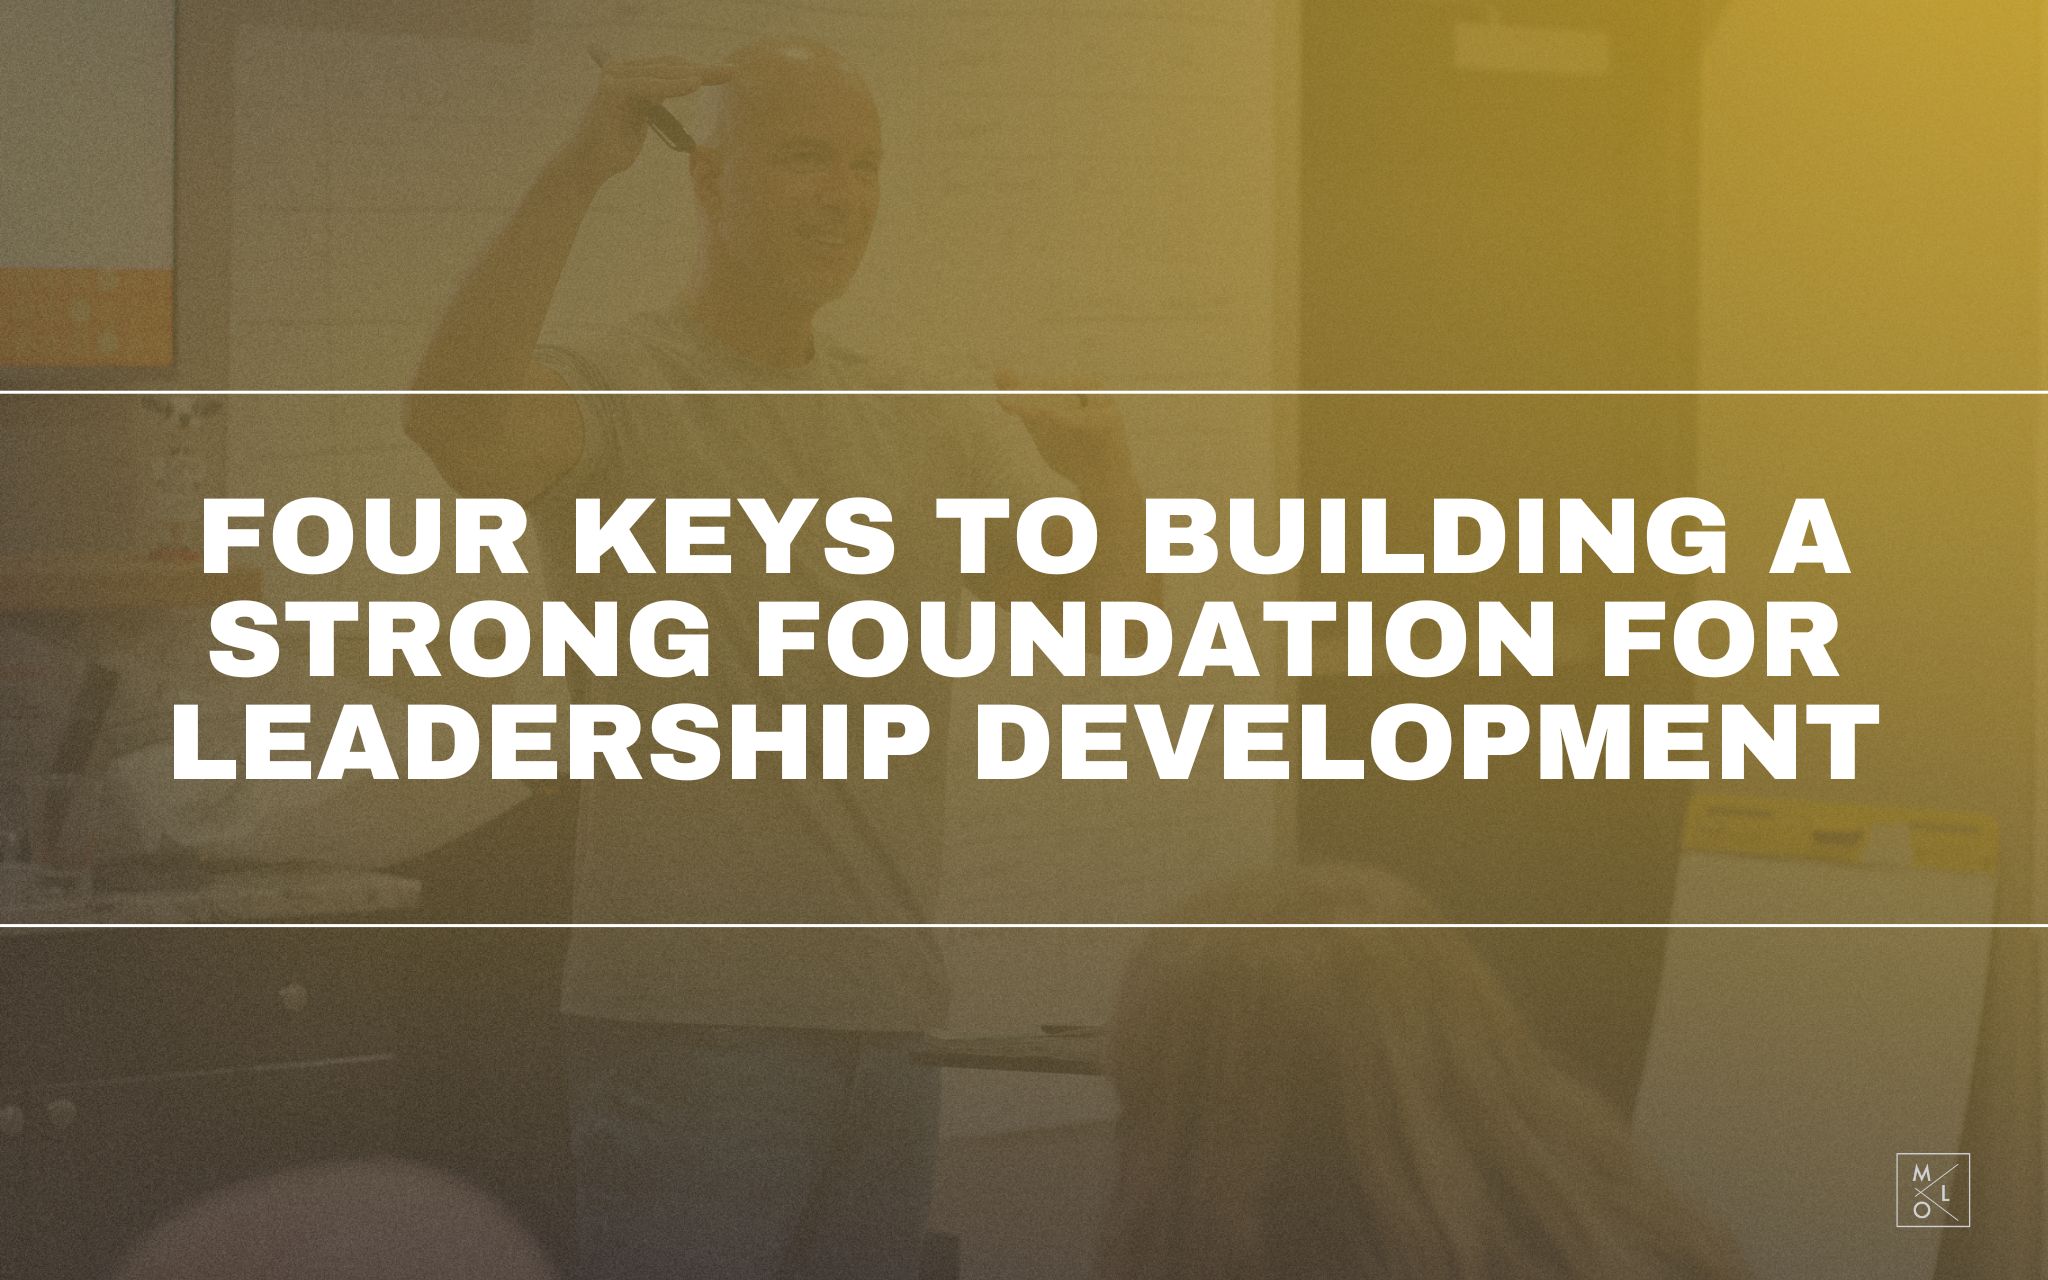 Four Keys To Building a Strong Foundation for Leadership Development